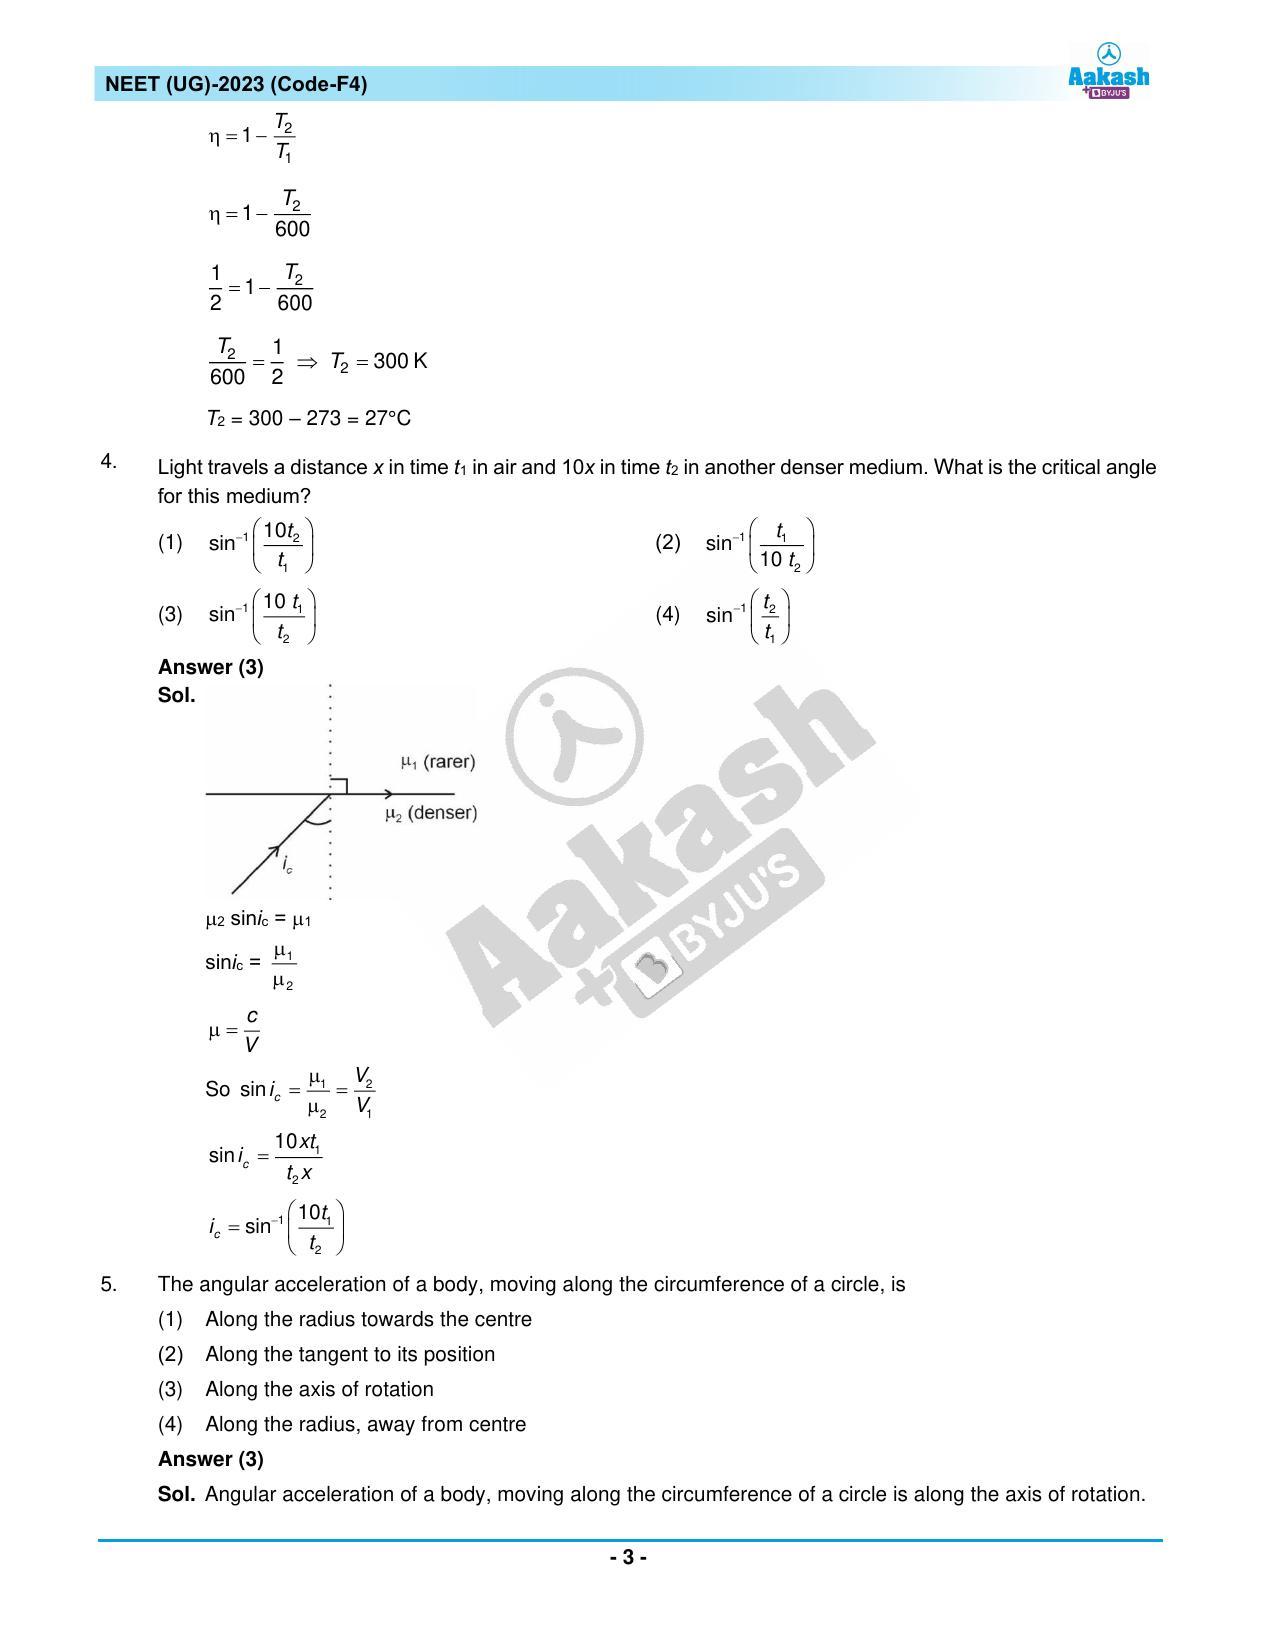 NEET 2023 Question Paper F4 - Page 3